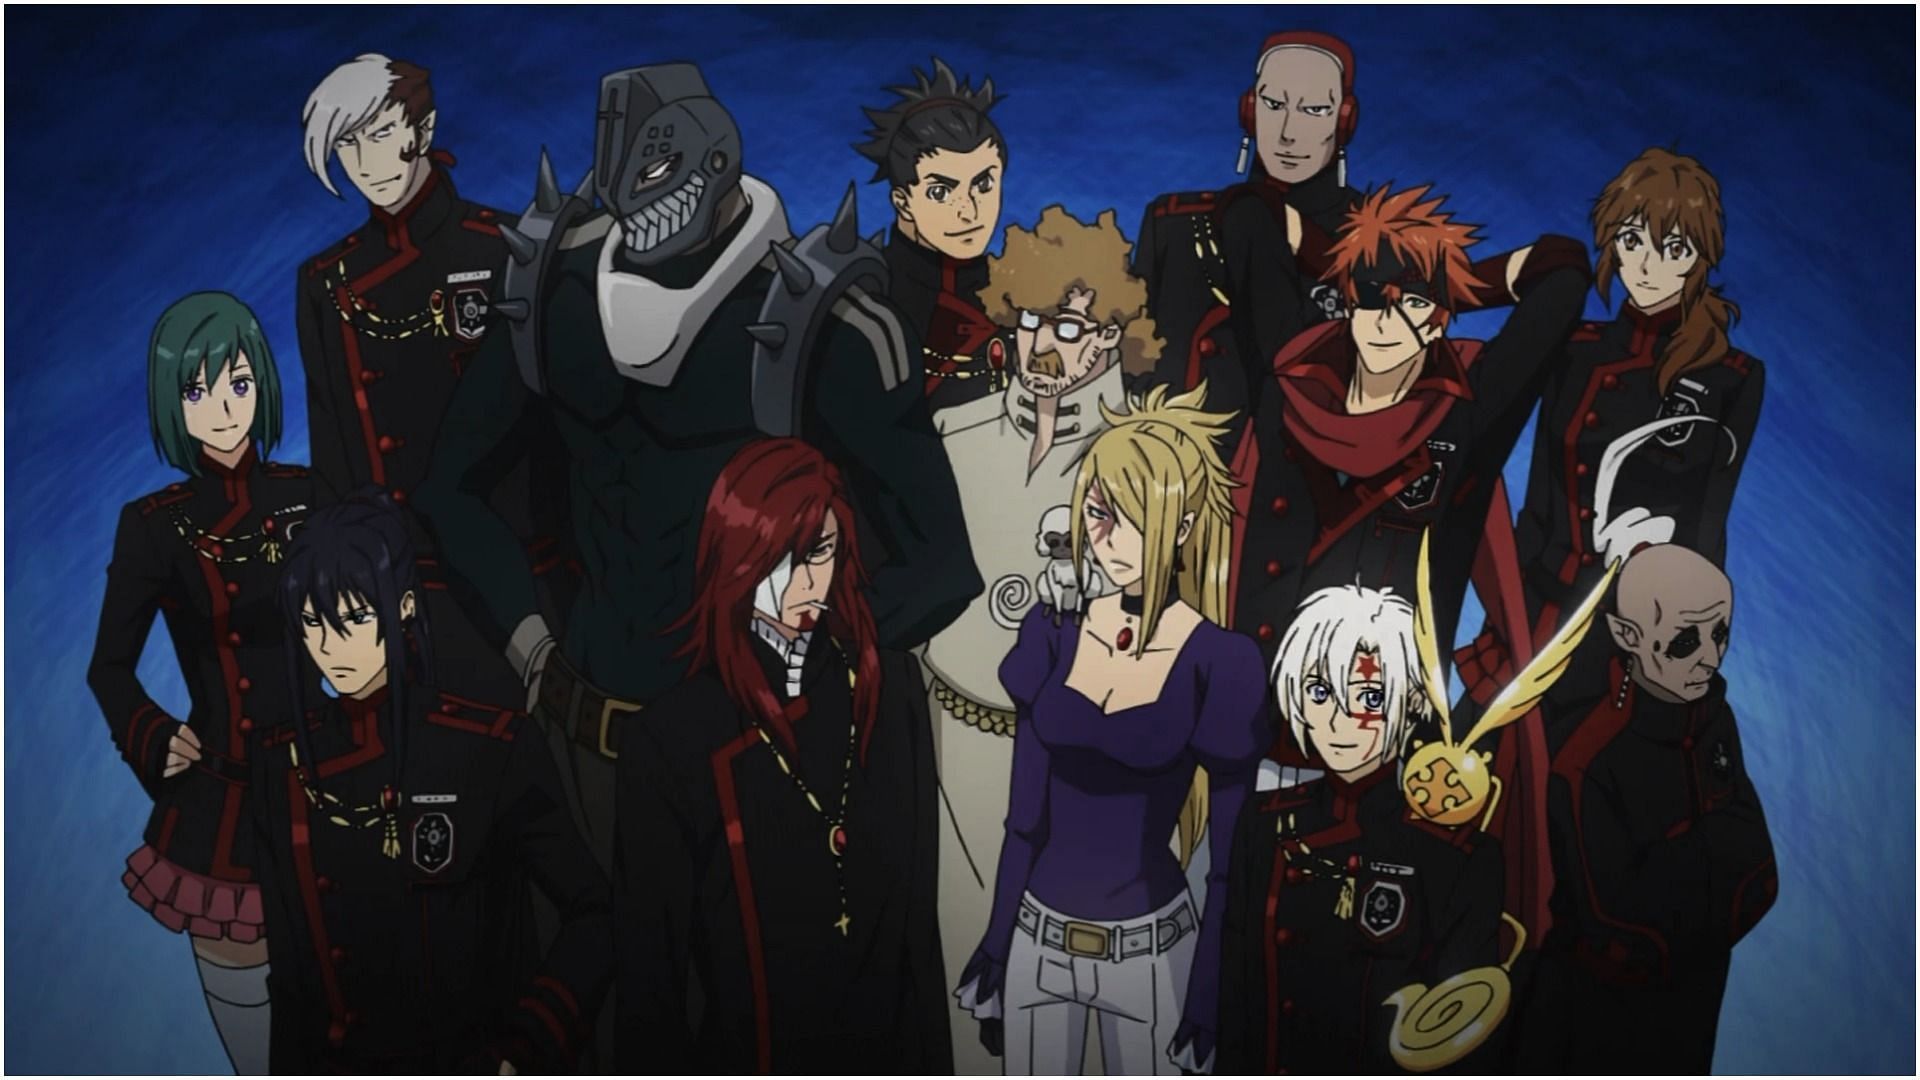 All characters of D.Gray-Man as seen in the anime (Image via TMS Entertainment)